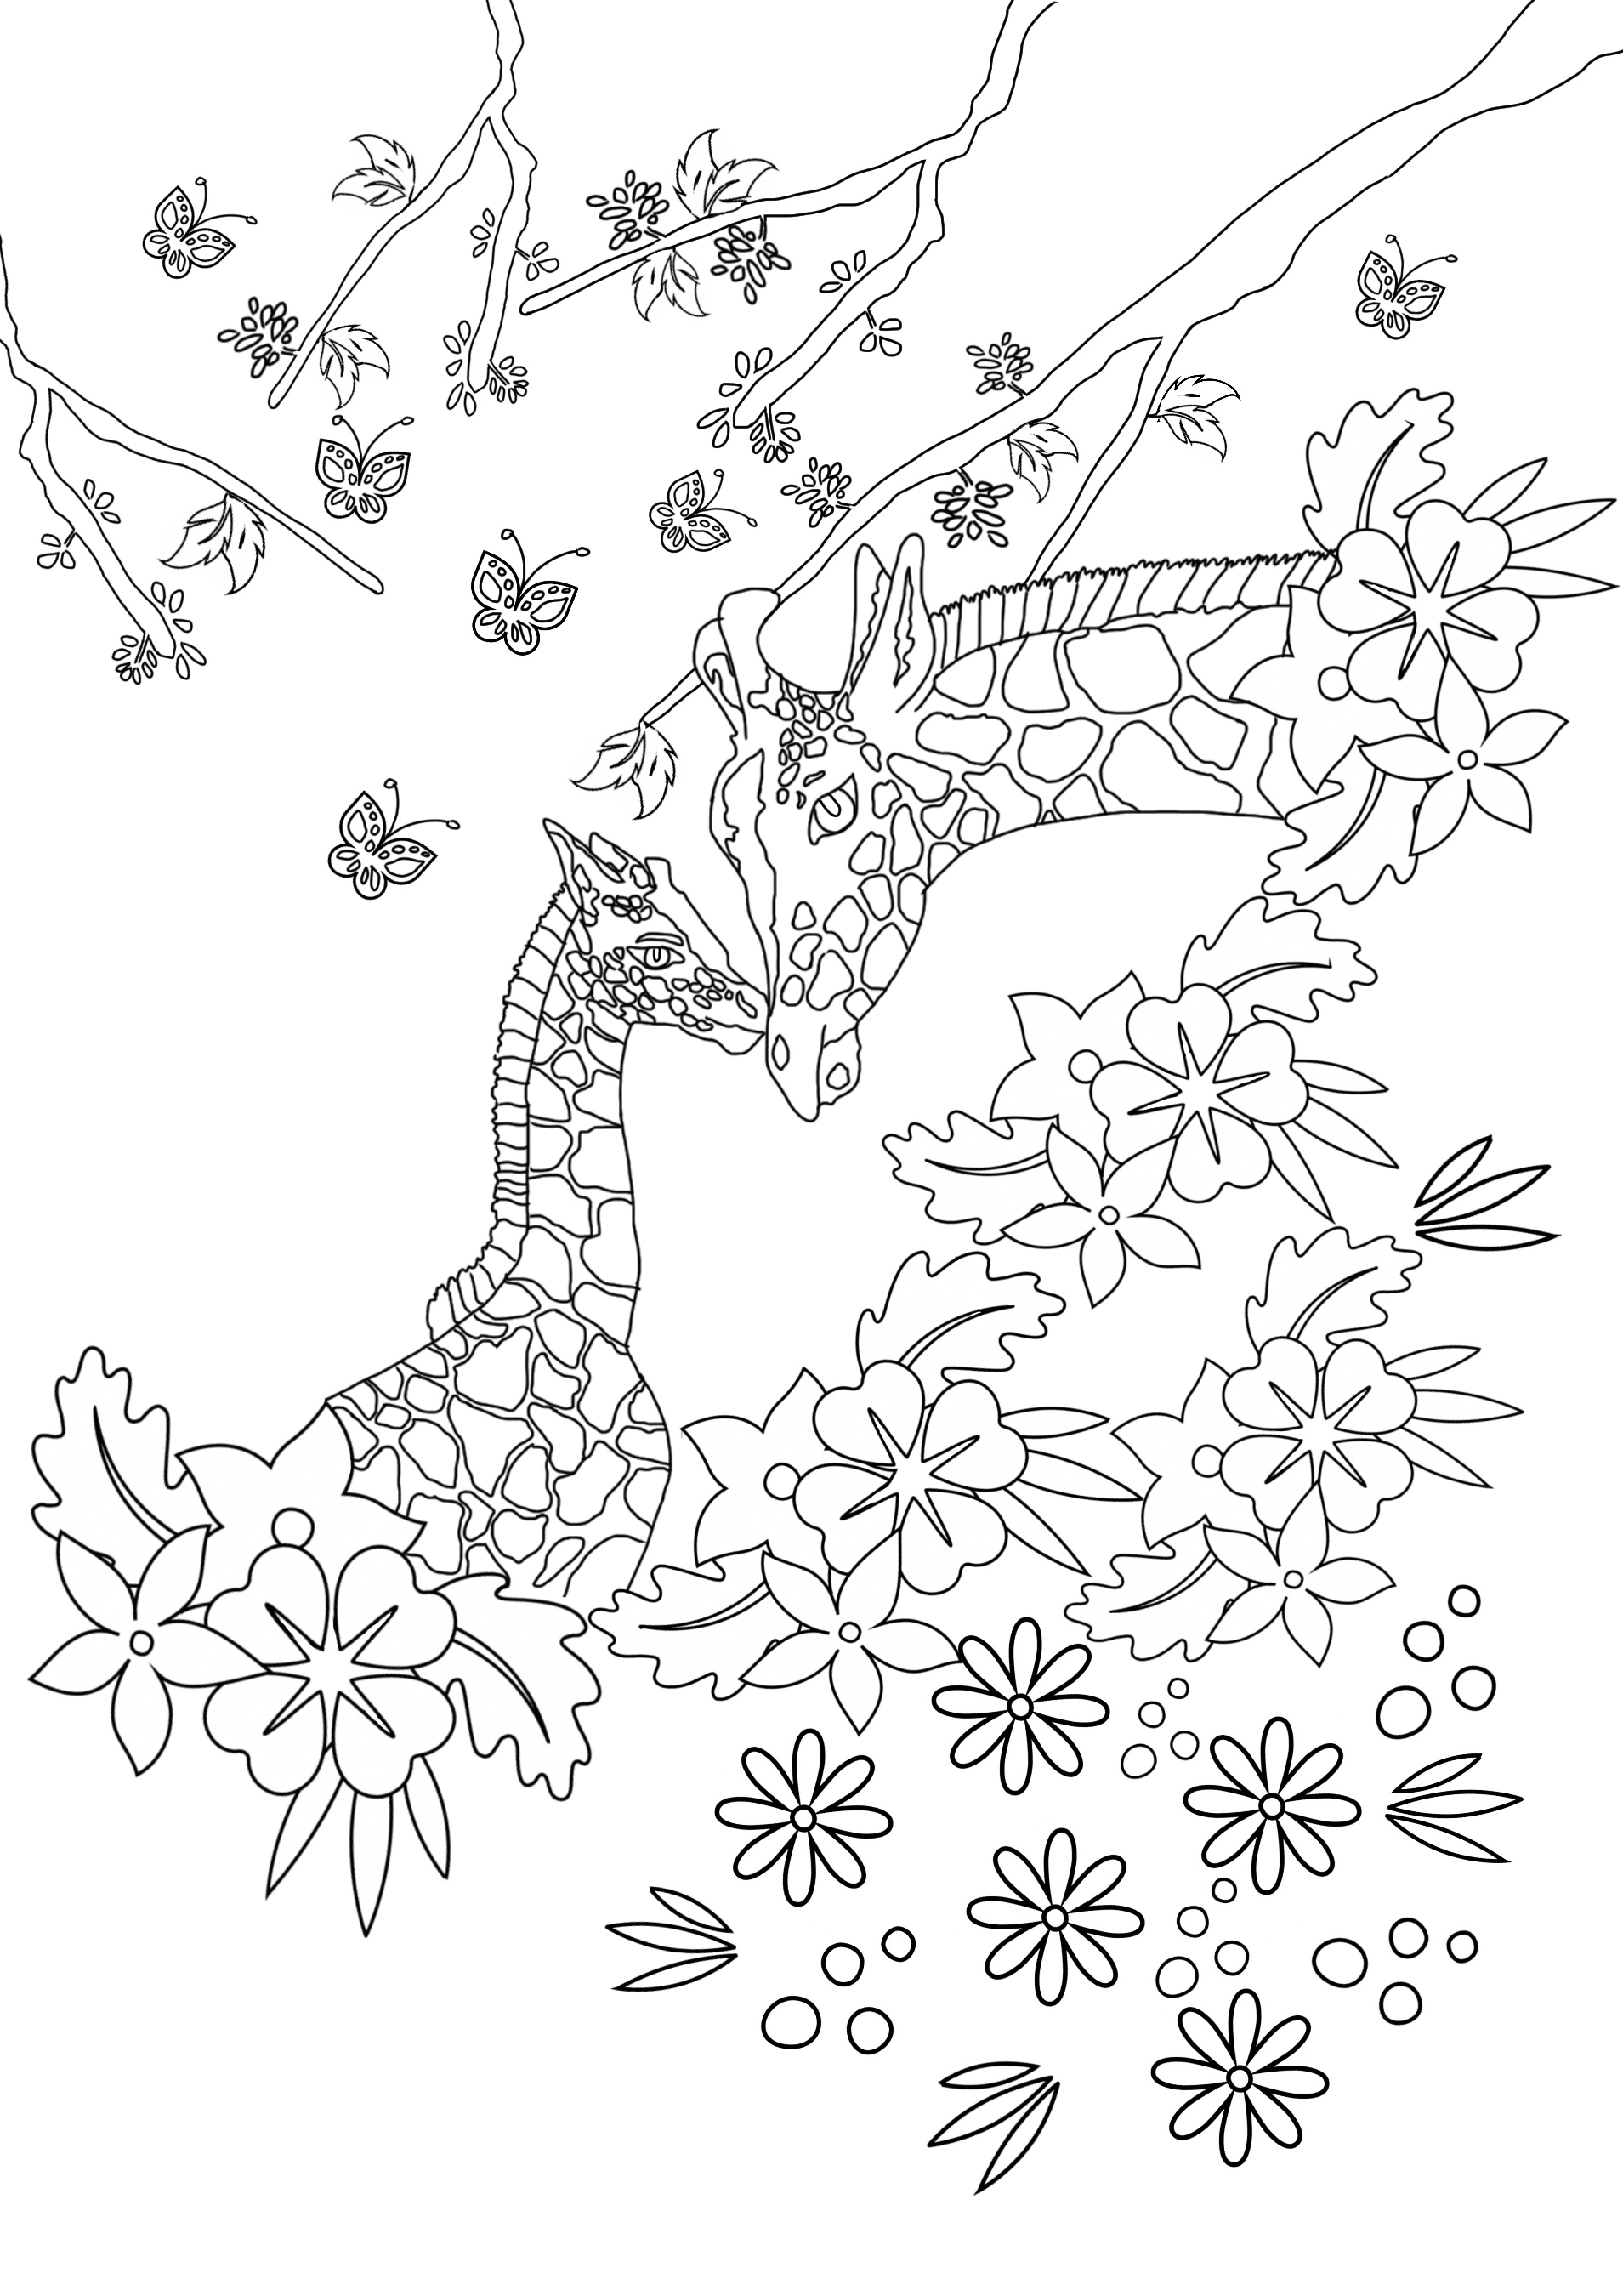 Mother and baby giraffe coloring sheet